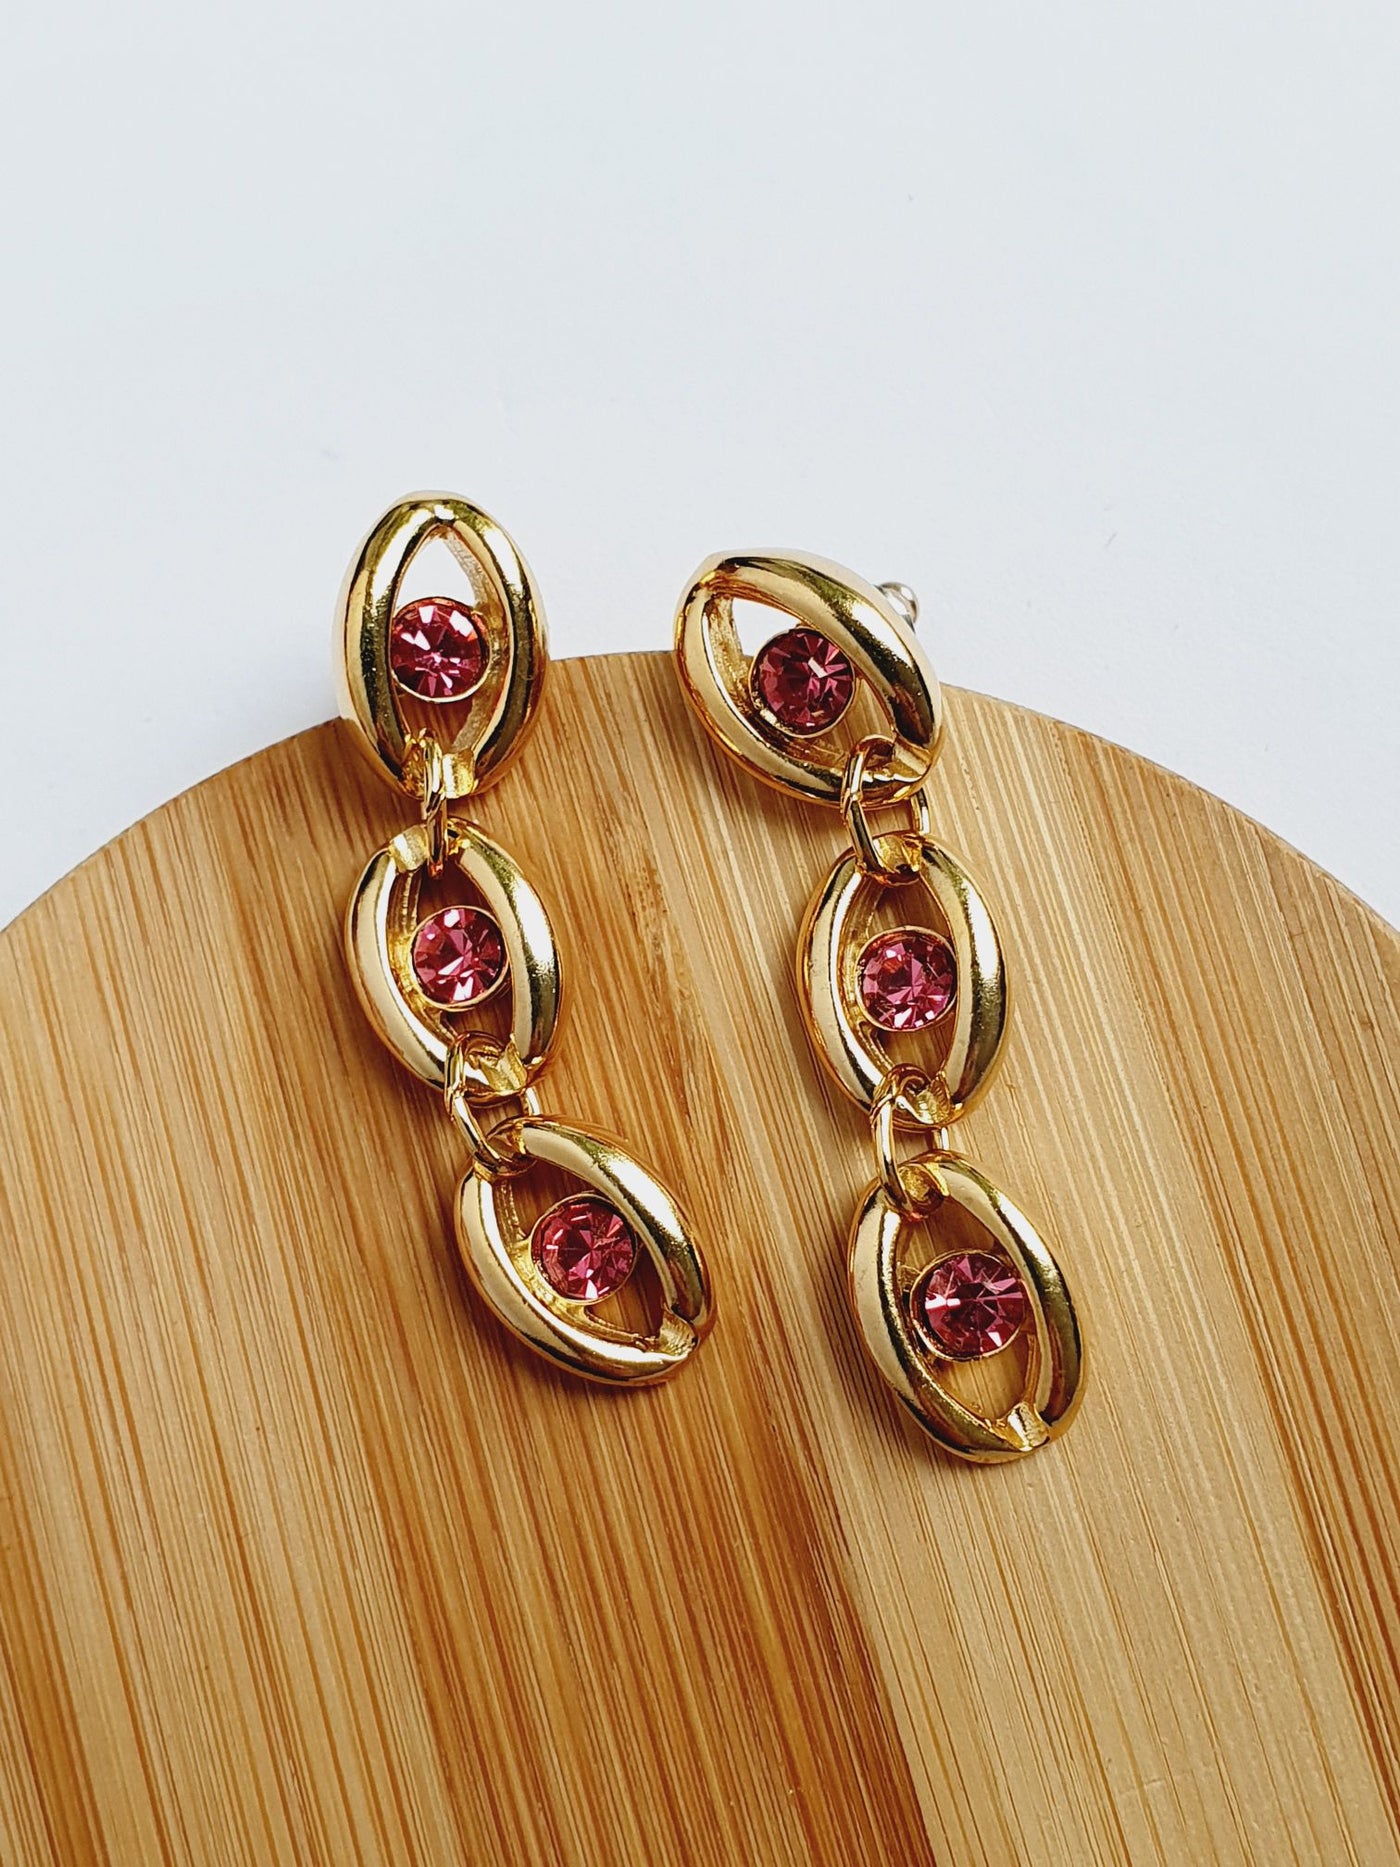 Vintage 80s Gold Plated Drop Earrings with Pink Crystals